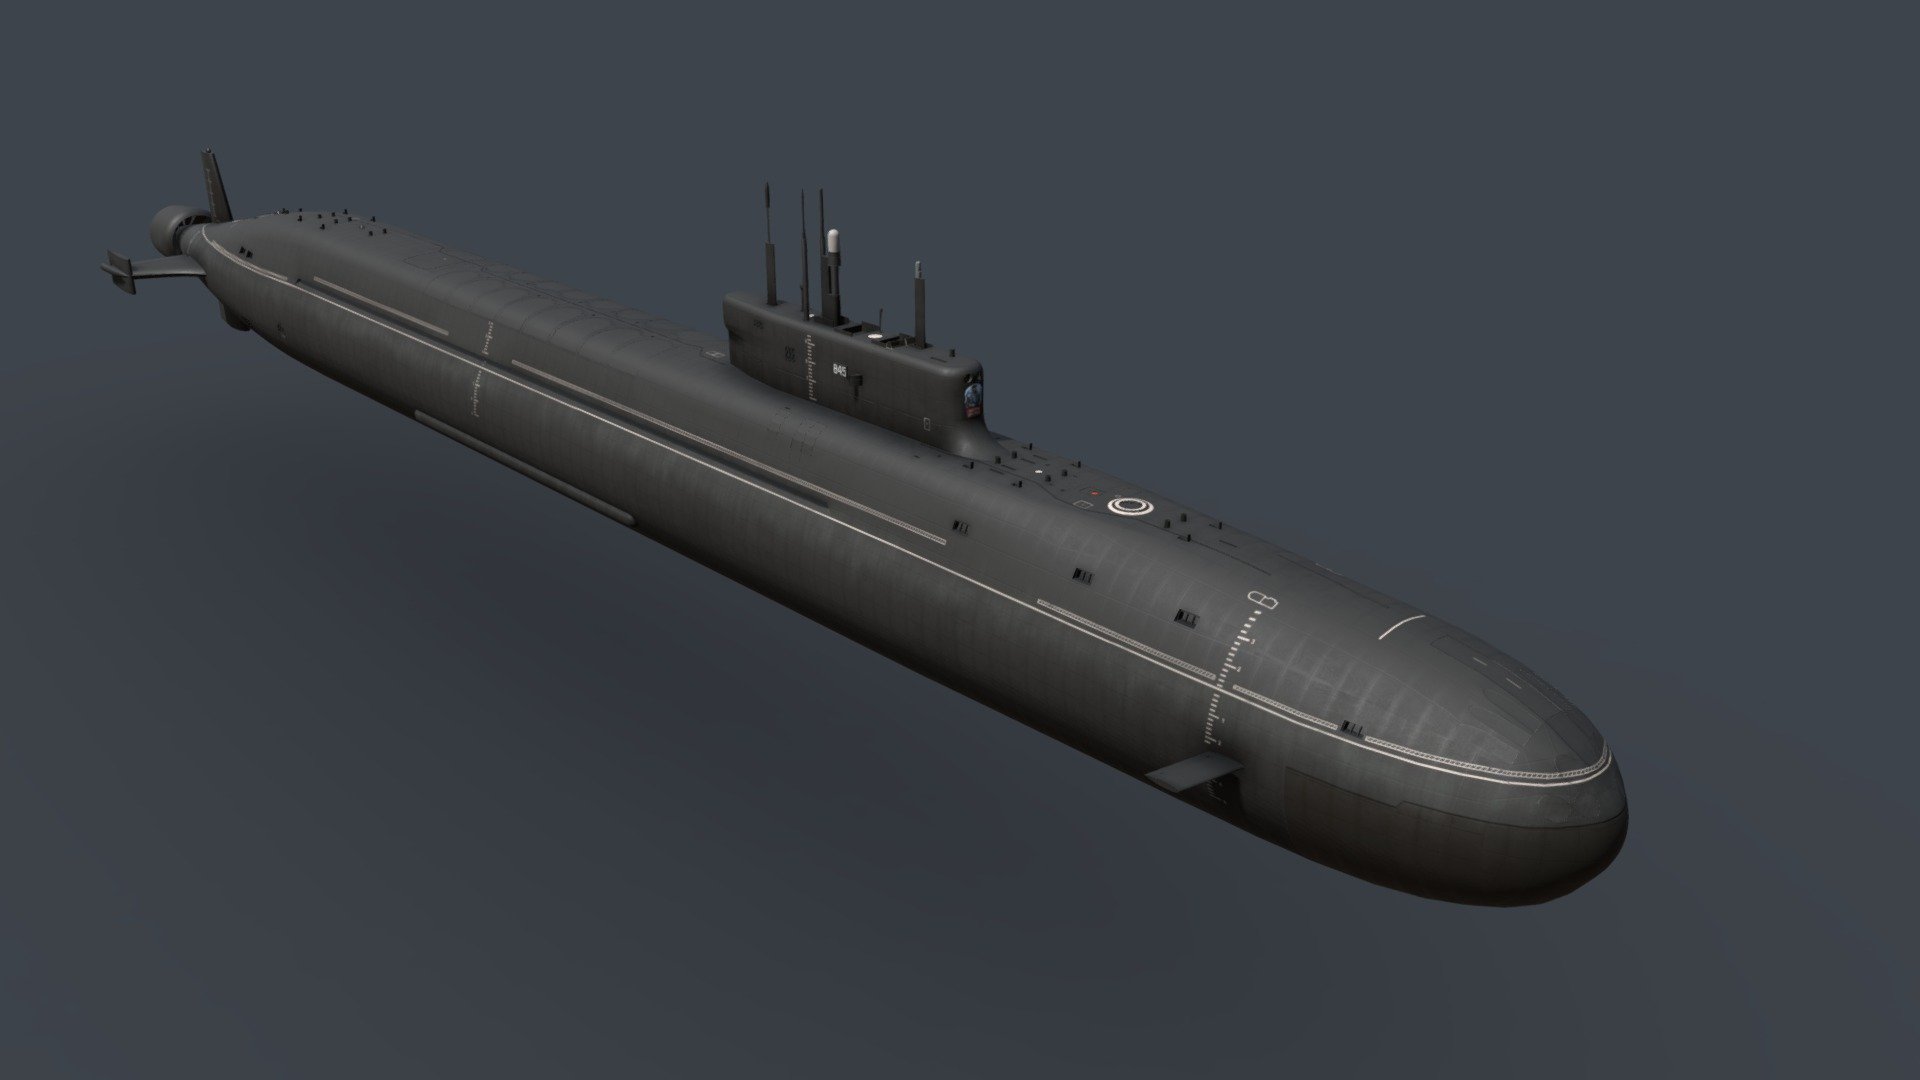 The Borei class, alternate transliteration Borey, Russian designation Project 955A Borei-A, are a series of nuclear-powered ballistic missile submarines being constructed by Sevmash for the Russian Navy.
Units of the Project 955A include improved communication and detection systems, improved acoustic signature and have major structural changes such as addition of all moving rudders and vertical endplates to the hydroplanes for higher maneuverability. Besides, they are equipped with hydraulic jets and improved screws that allow them to sail at nearly 30 knots while submerged with minimal noise. The 955A will be armed with 16 SLBMs with 6-10 nuclear warheads atop each 3d model